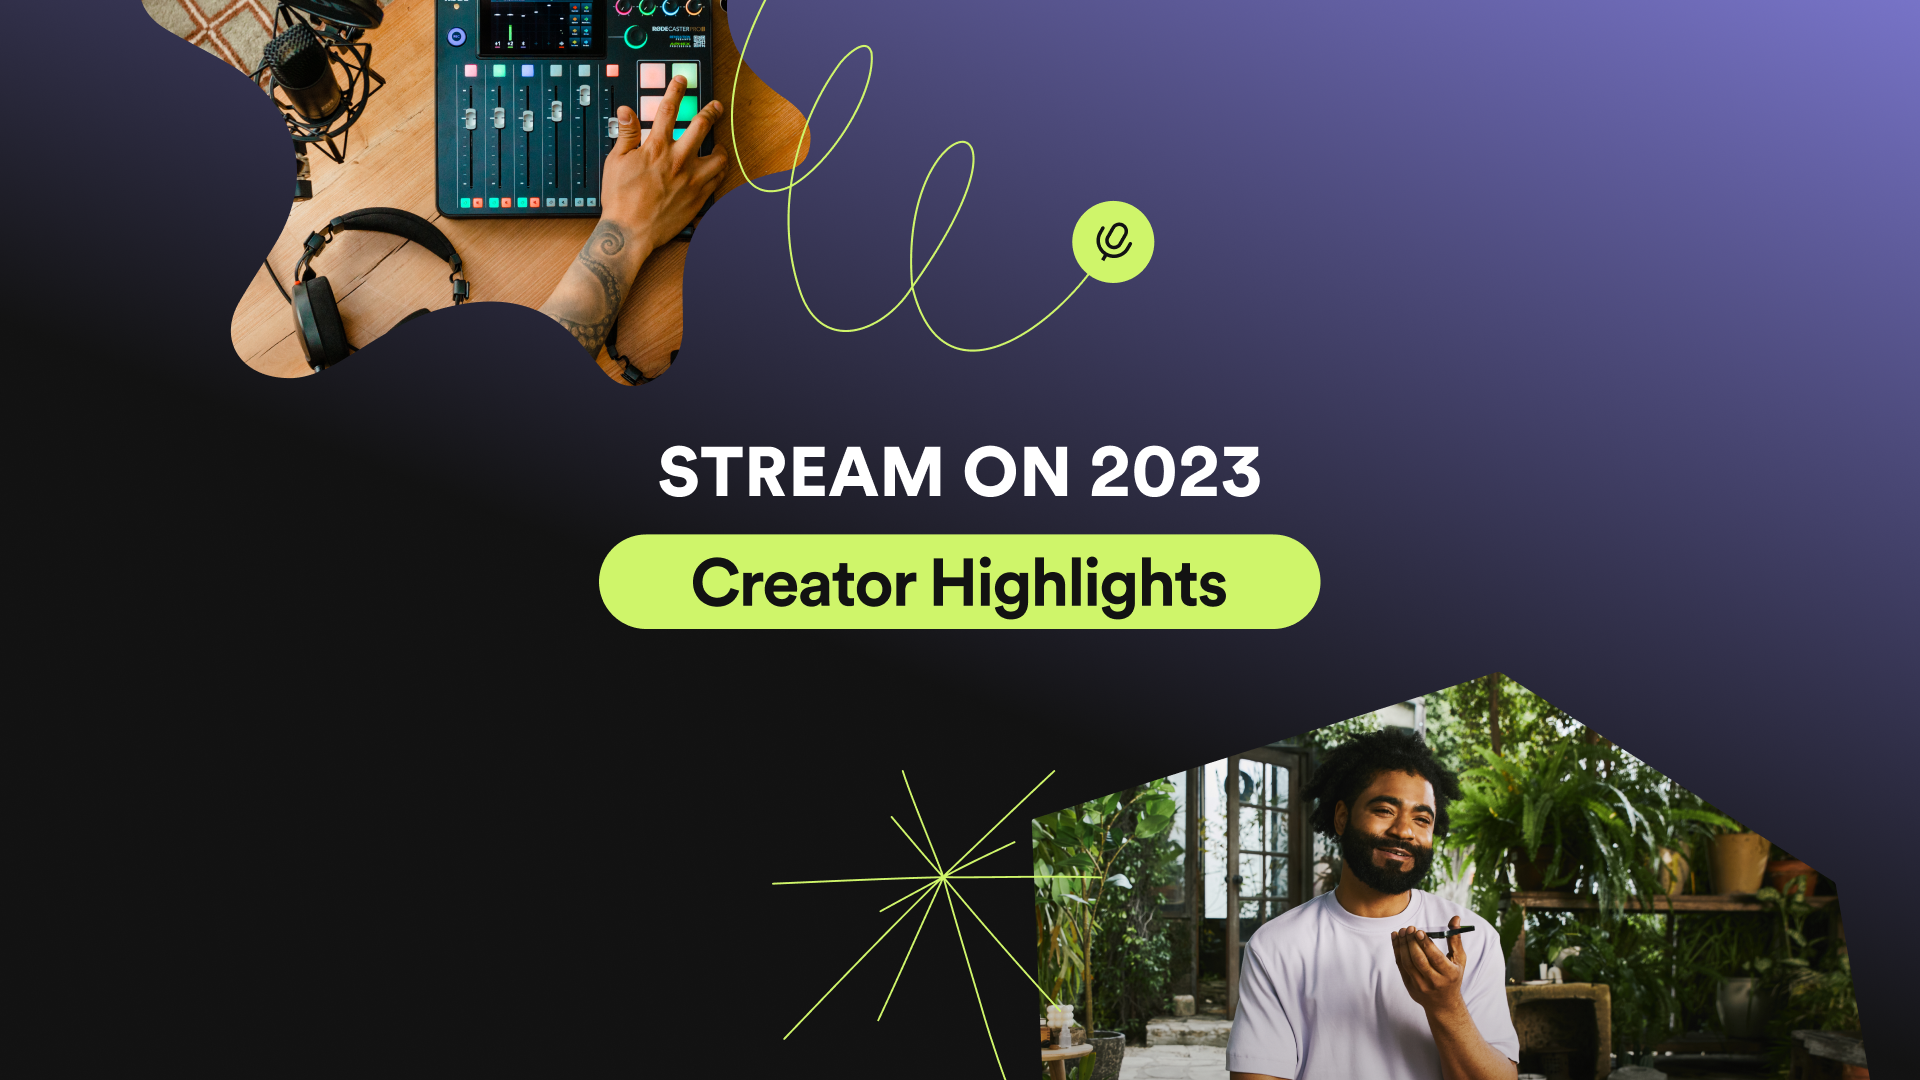 What did Spotify announce at Stream On 2023? – New features for artists and listeners